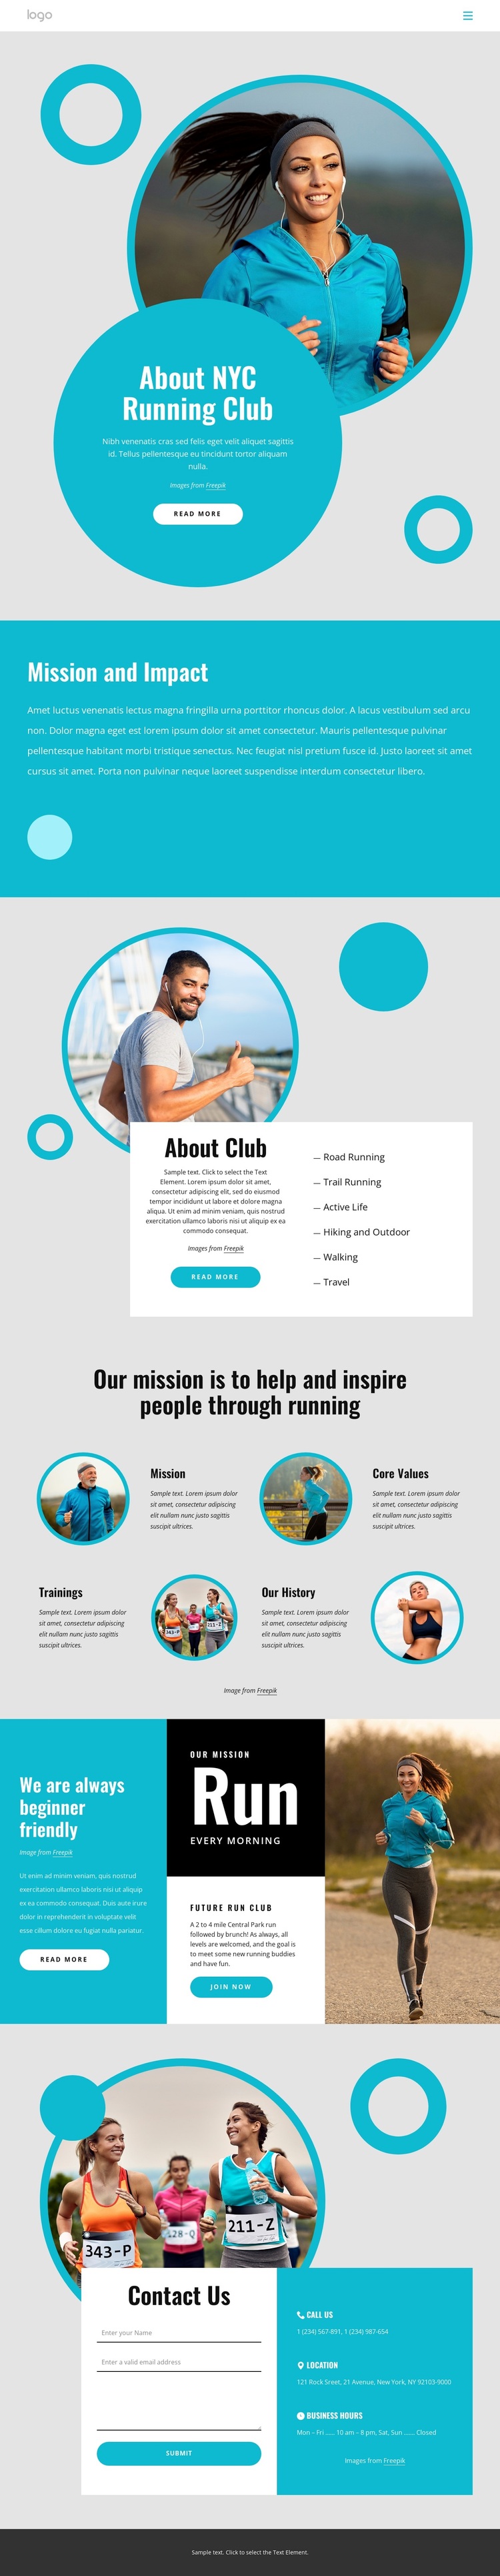 About NYC running club Template